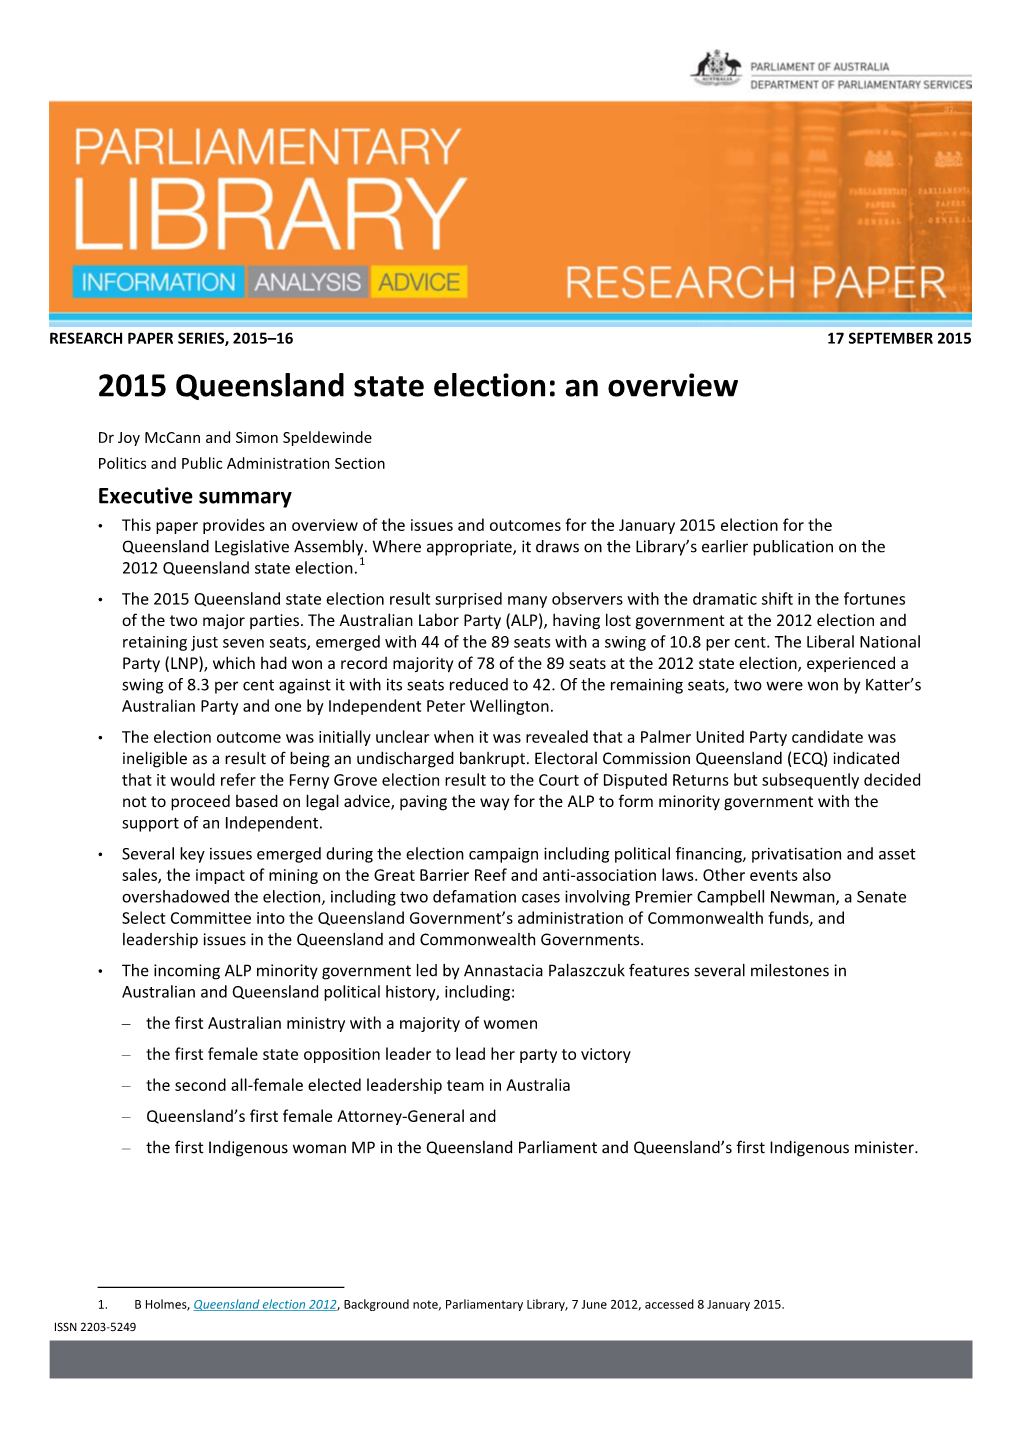 2015 Queensland State Election: an Overview